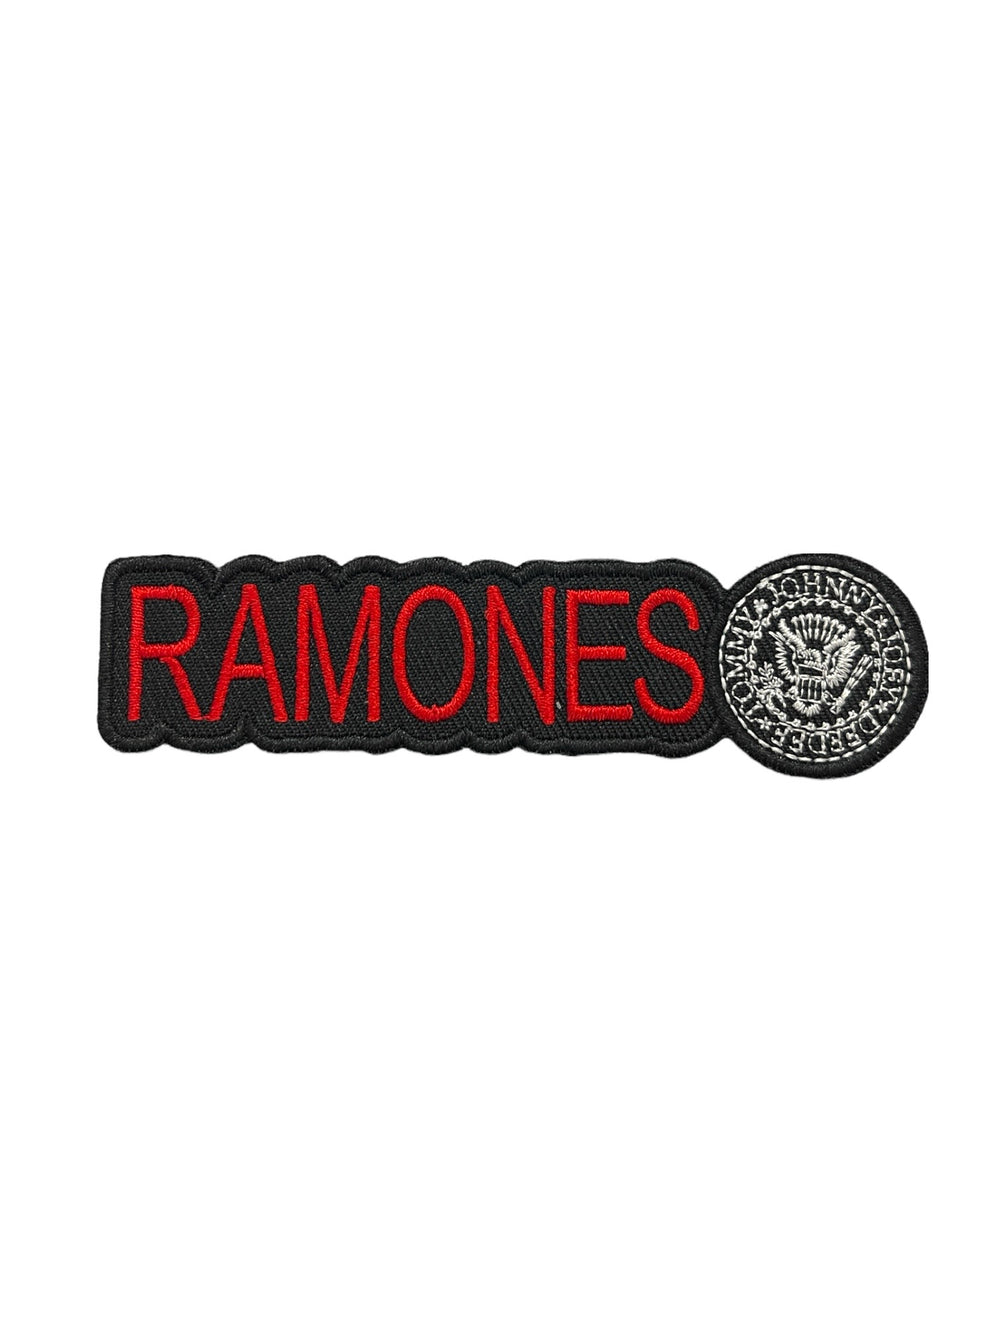 Ramones Logo & Seal Official Woven Patch Brand New